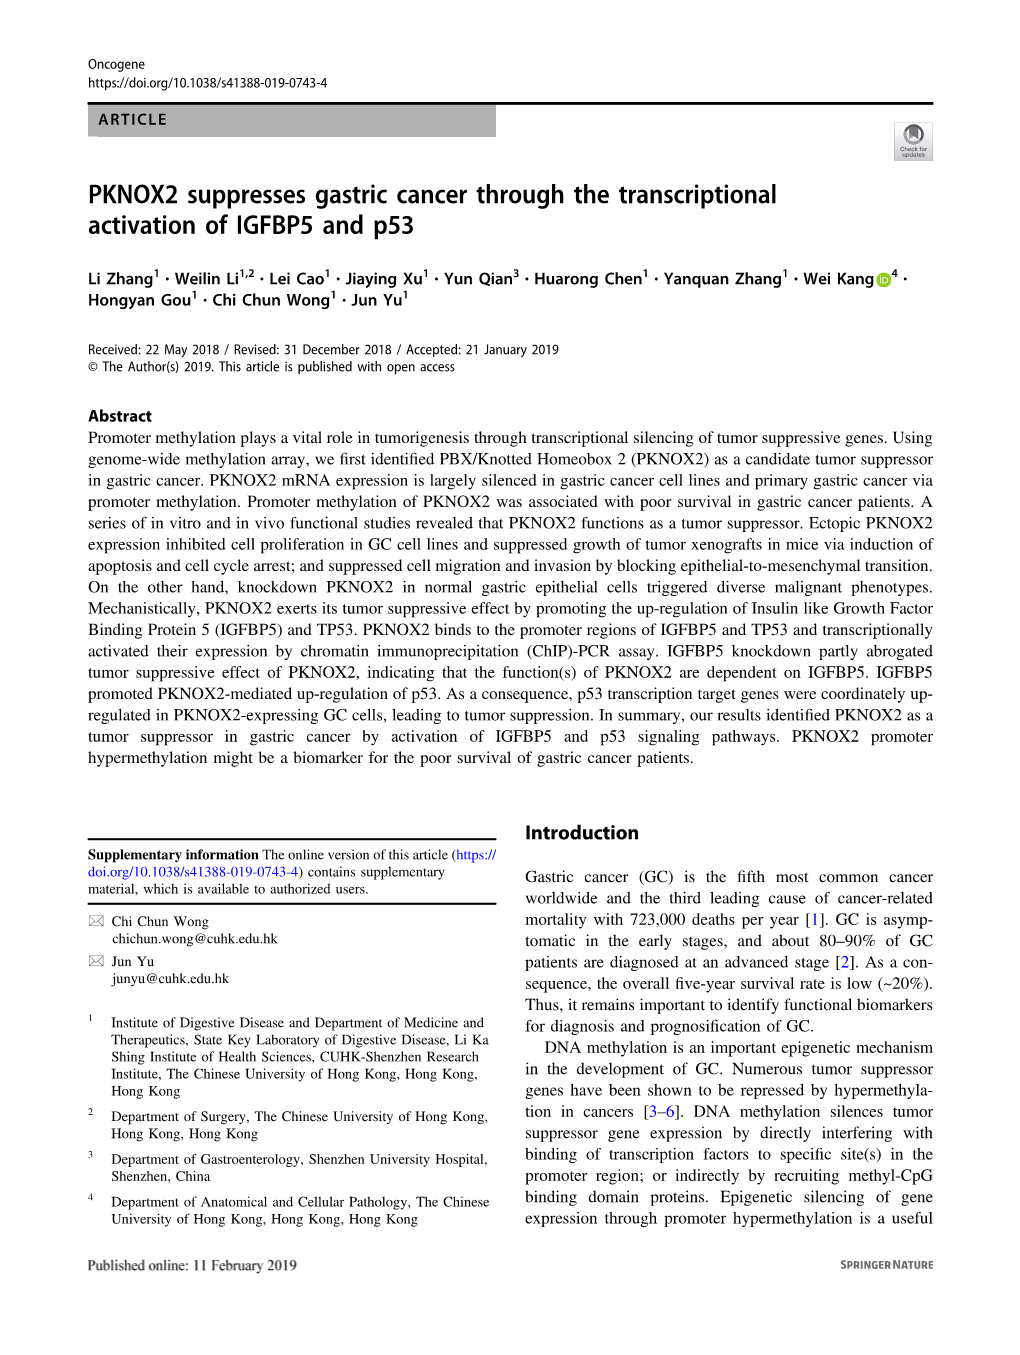 PKNOX2 Suppresses Gastric Cancer Through the Transcriptional Activation of IGFBP5 and P53